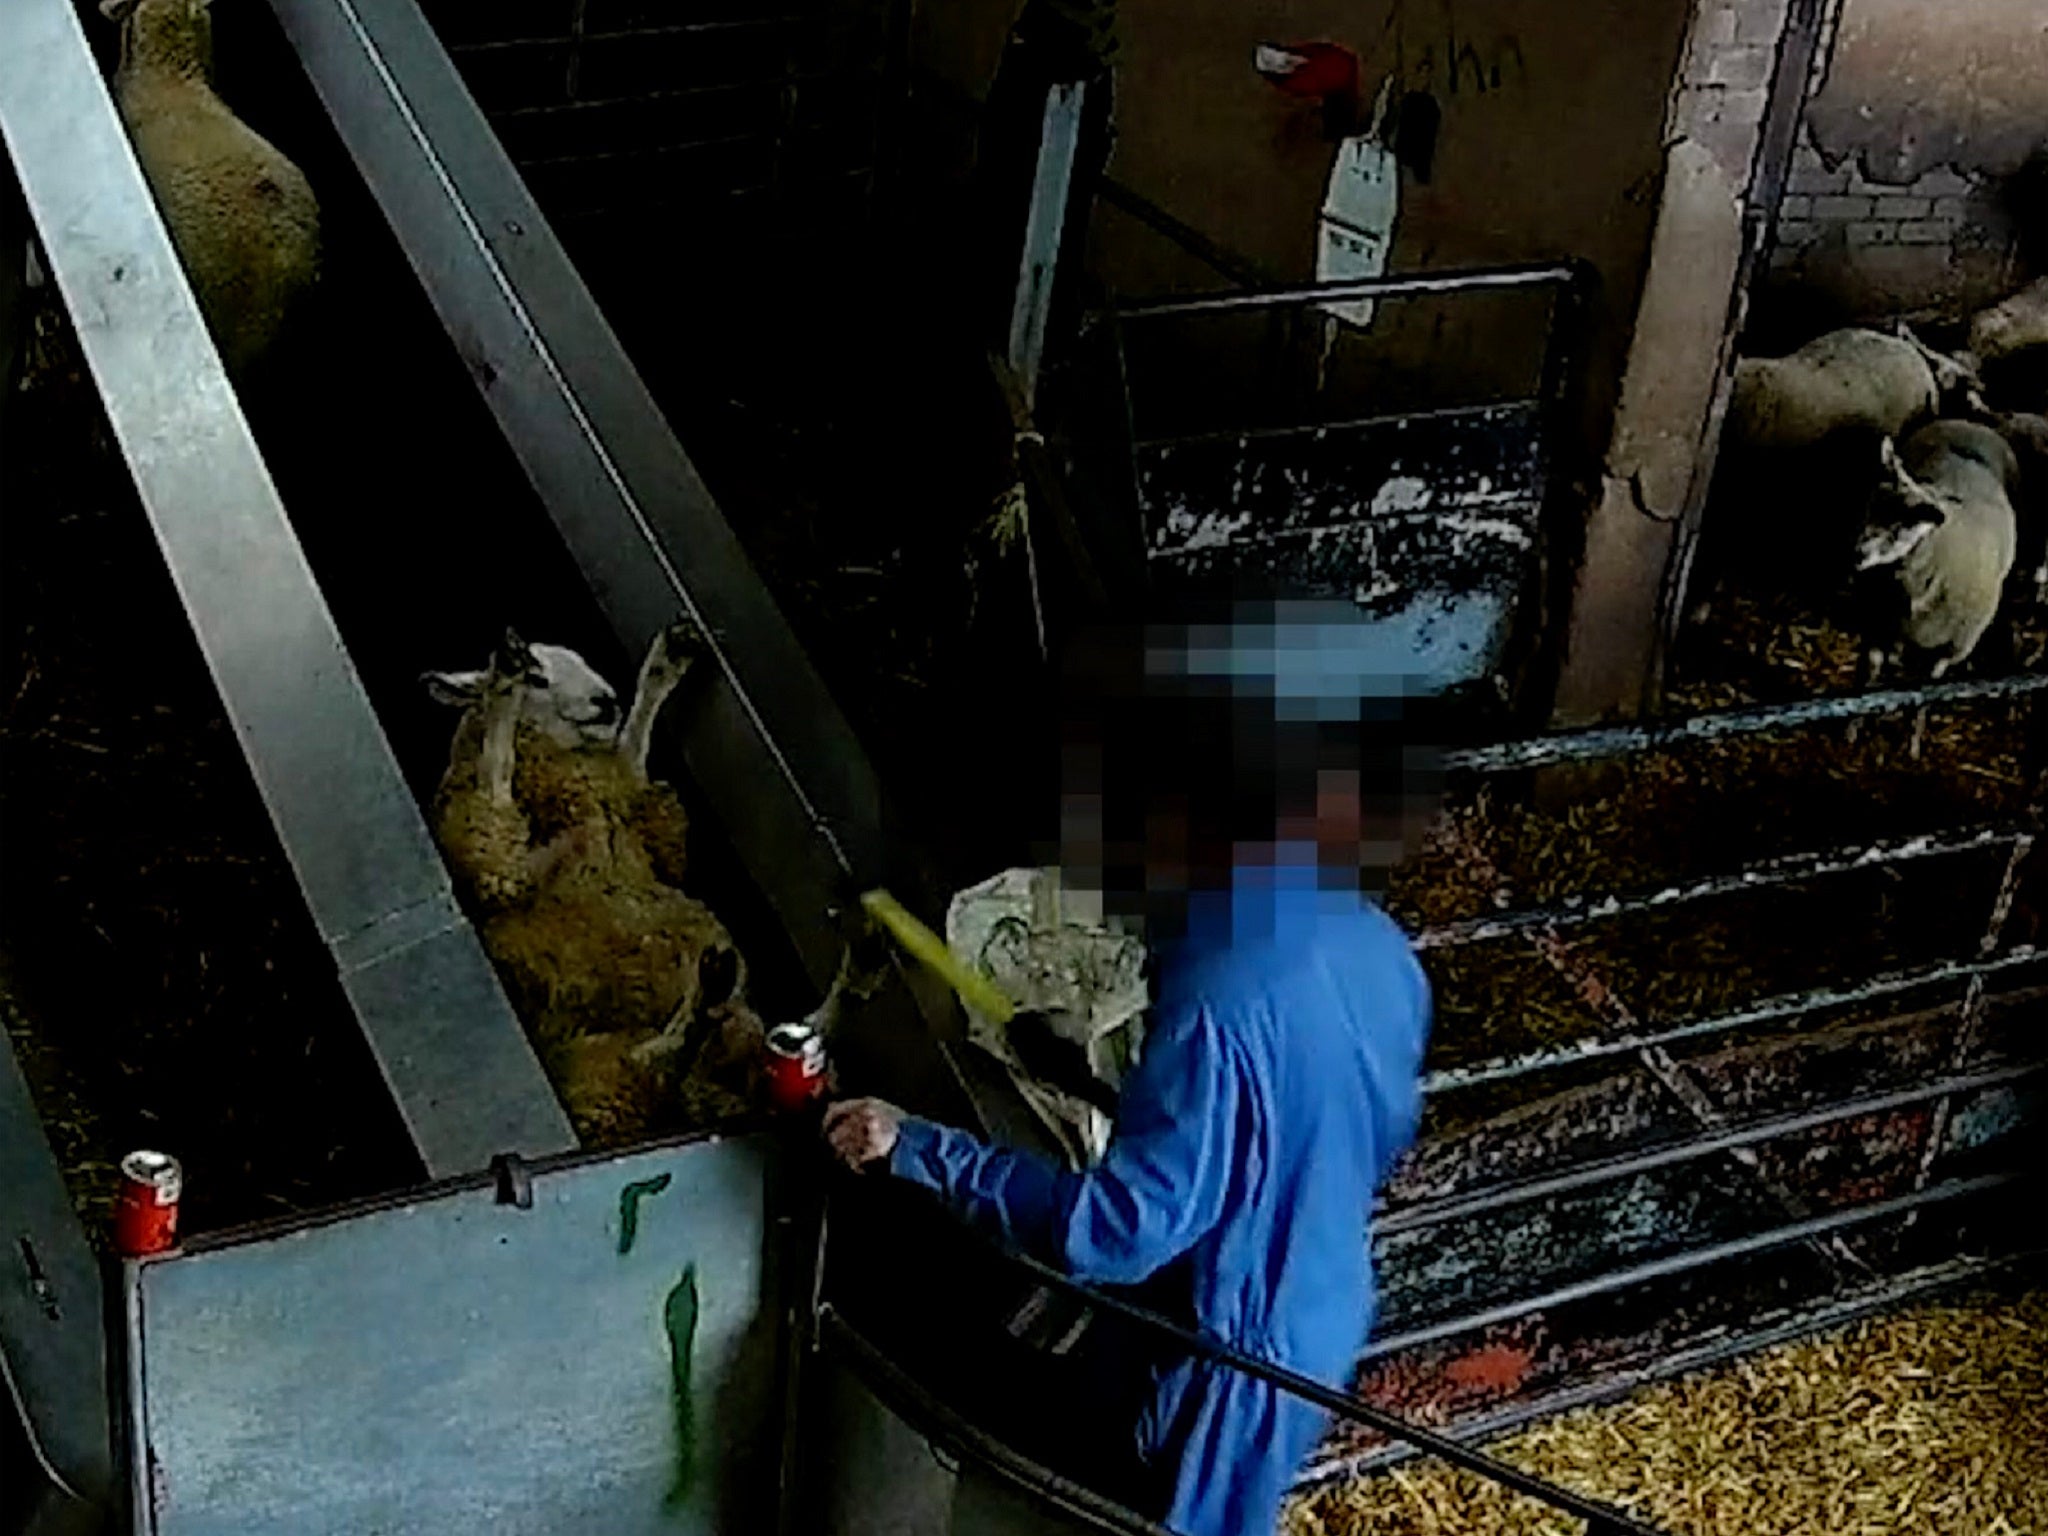 Covert video footage captured by Animal Aid activists allegedly shows sheep being mistreated at Farmers Fresh abattoir in Wrexham, Wales.